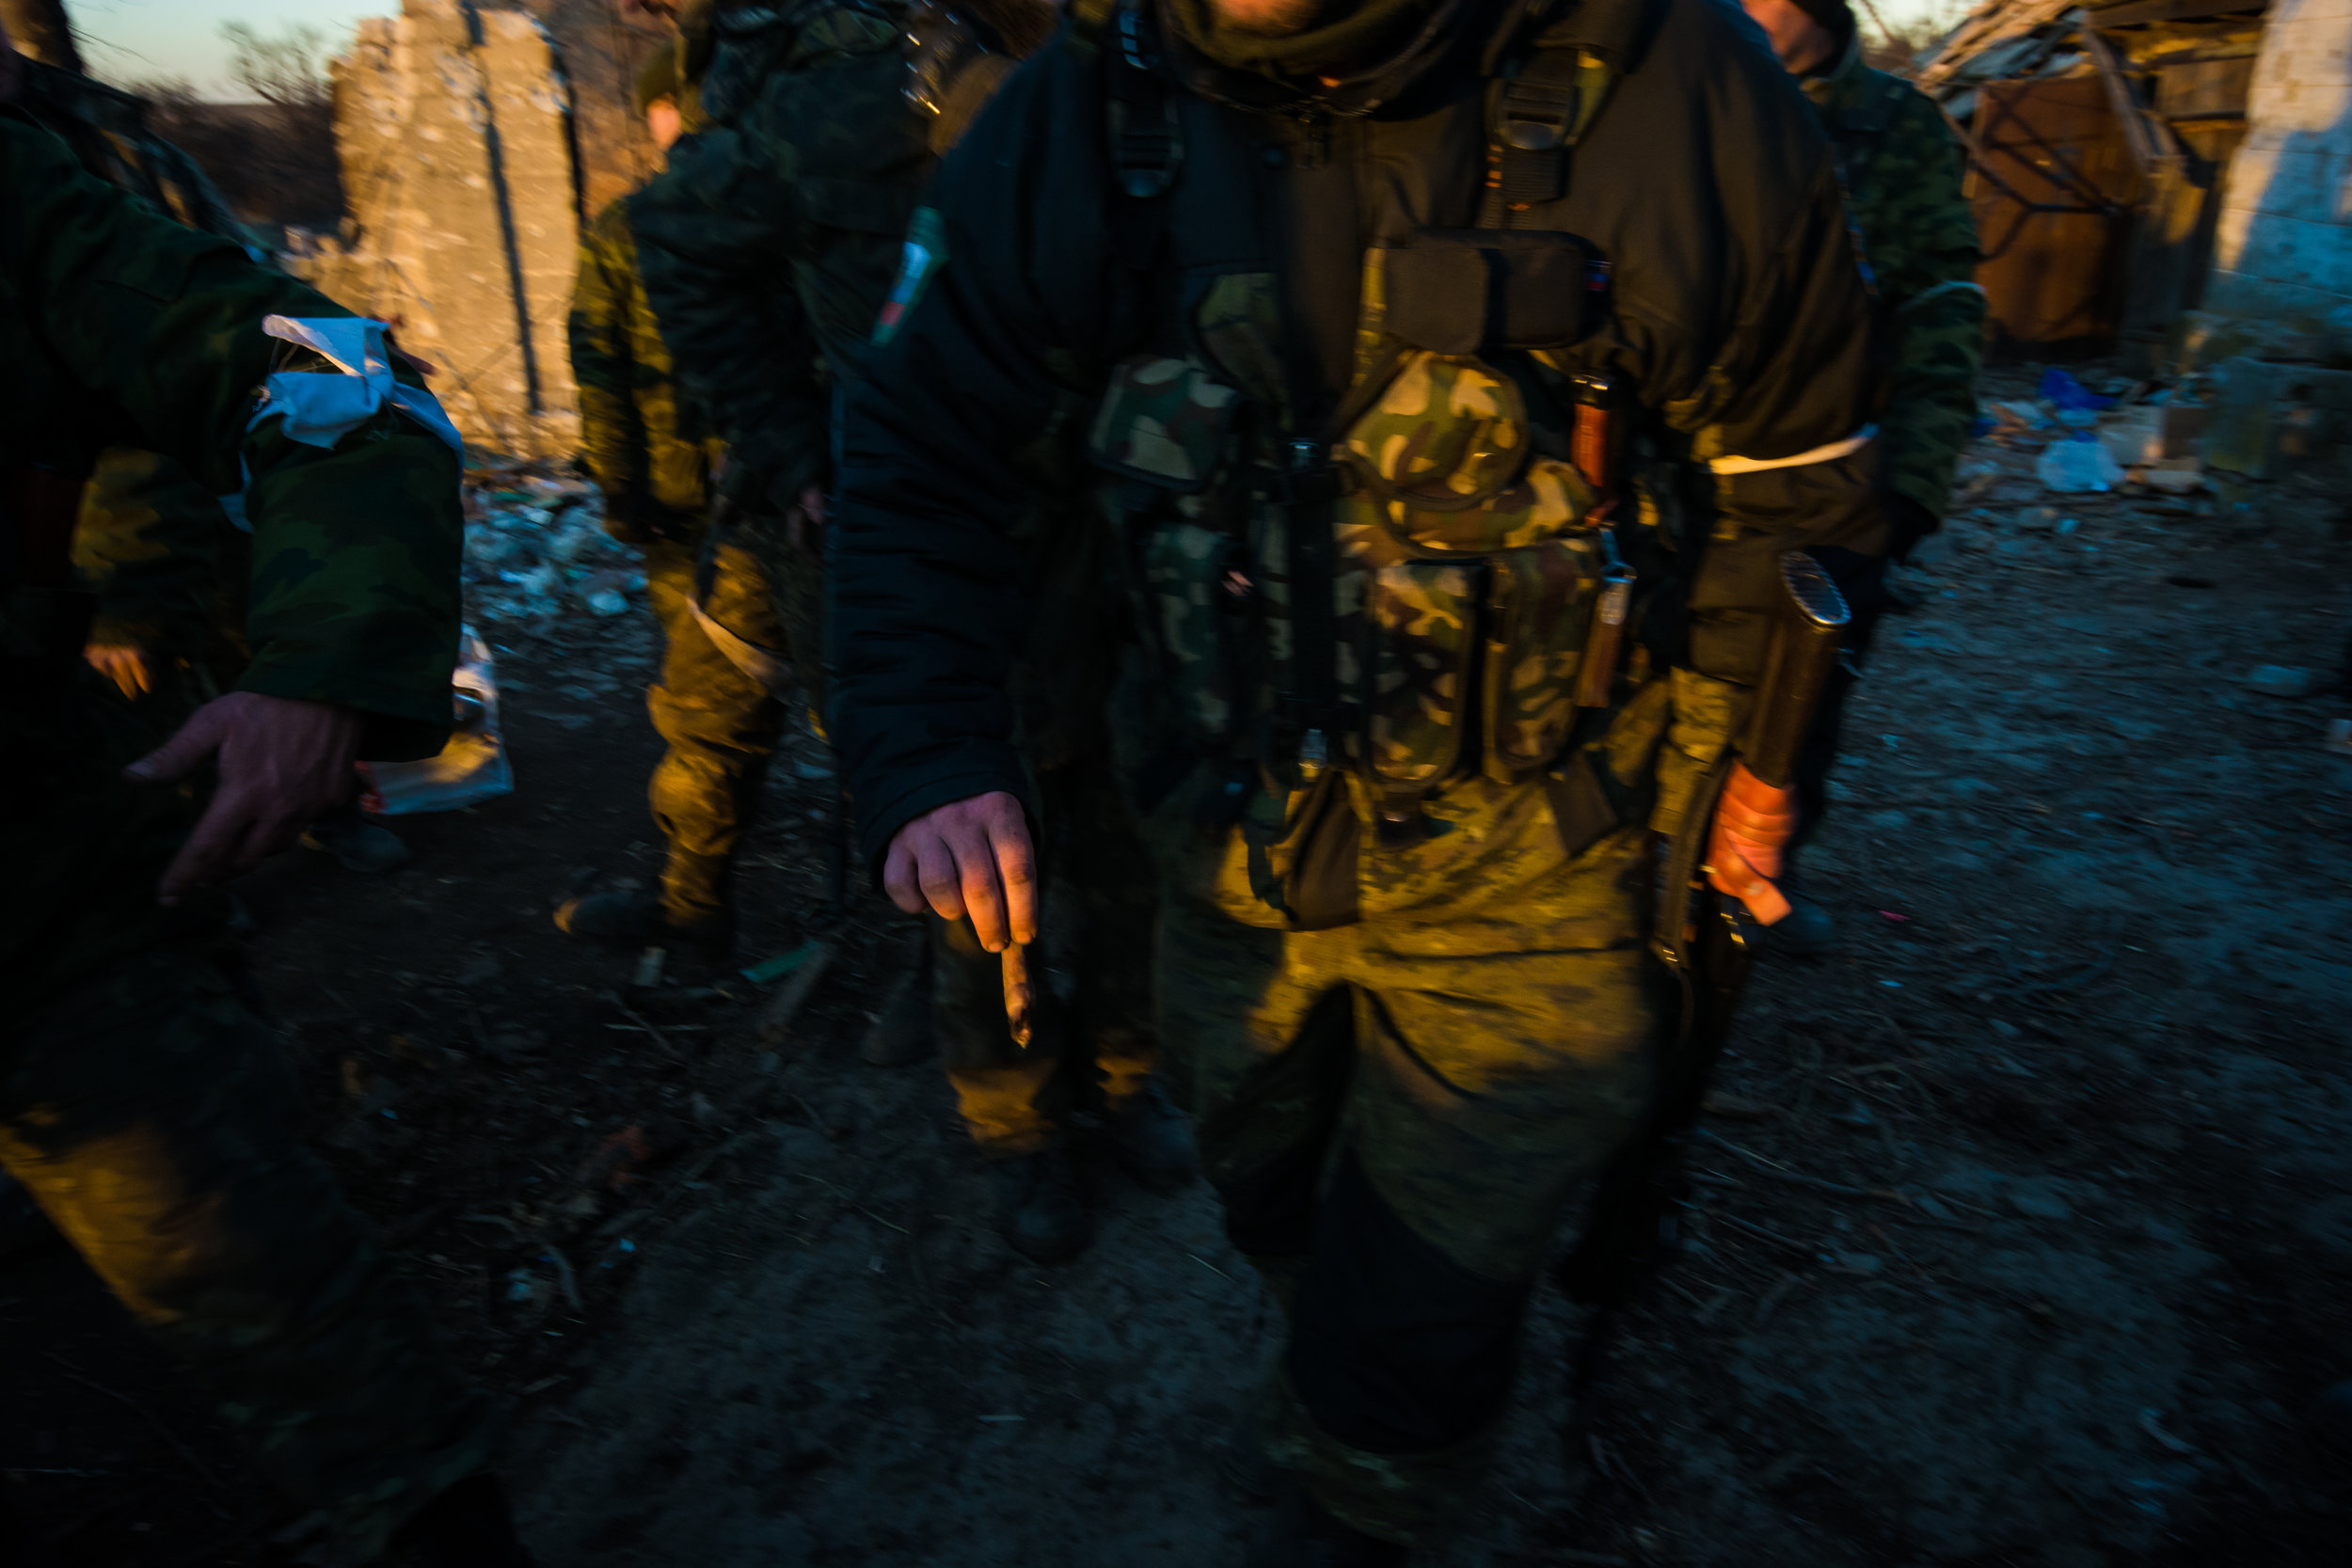  In February 2015, soldiers from the Donetsk People’s Republic, with military assistance from the Russian Federation, routed out the Ukrainian army from the Debaltseve pocket in one of the bloodiest battles of the war. Here, a separatist soldier show